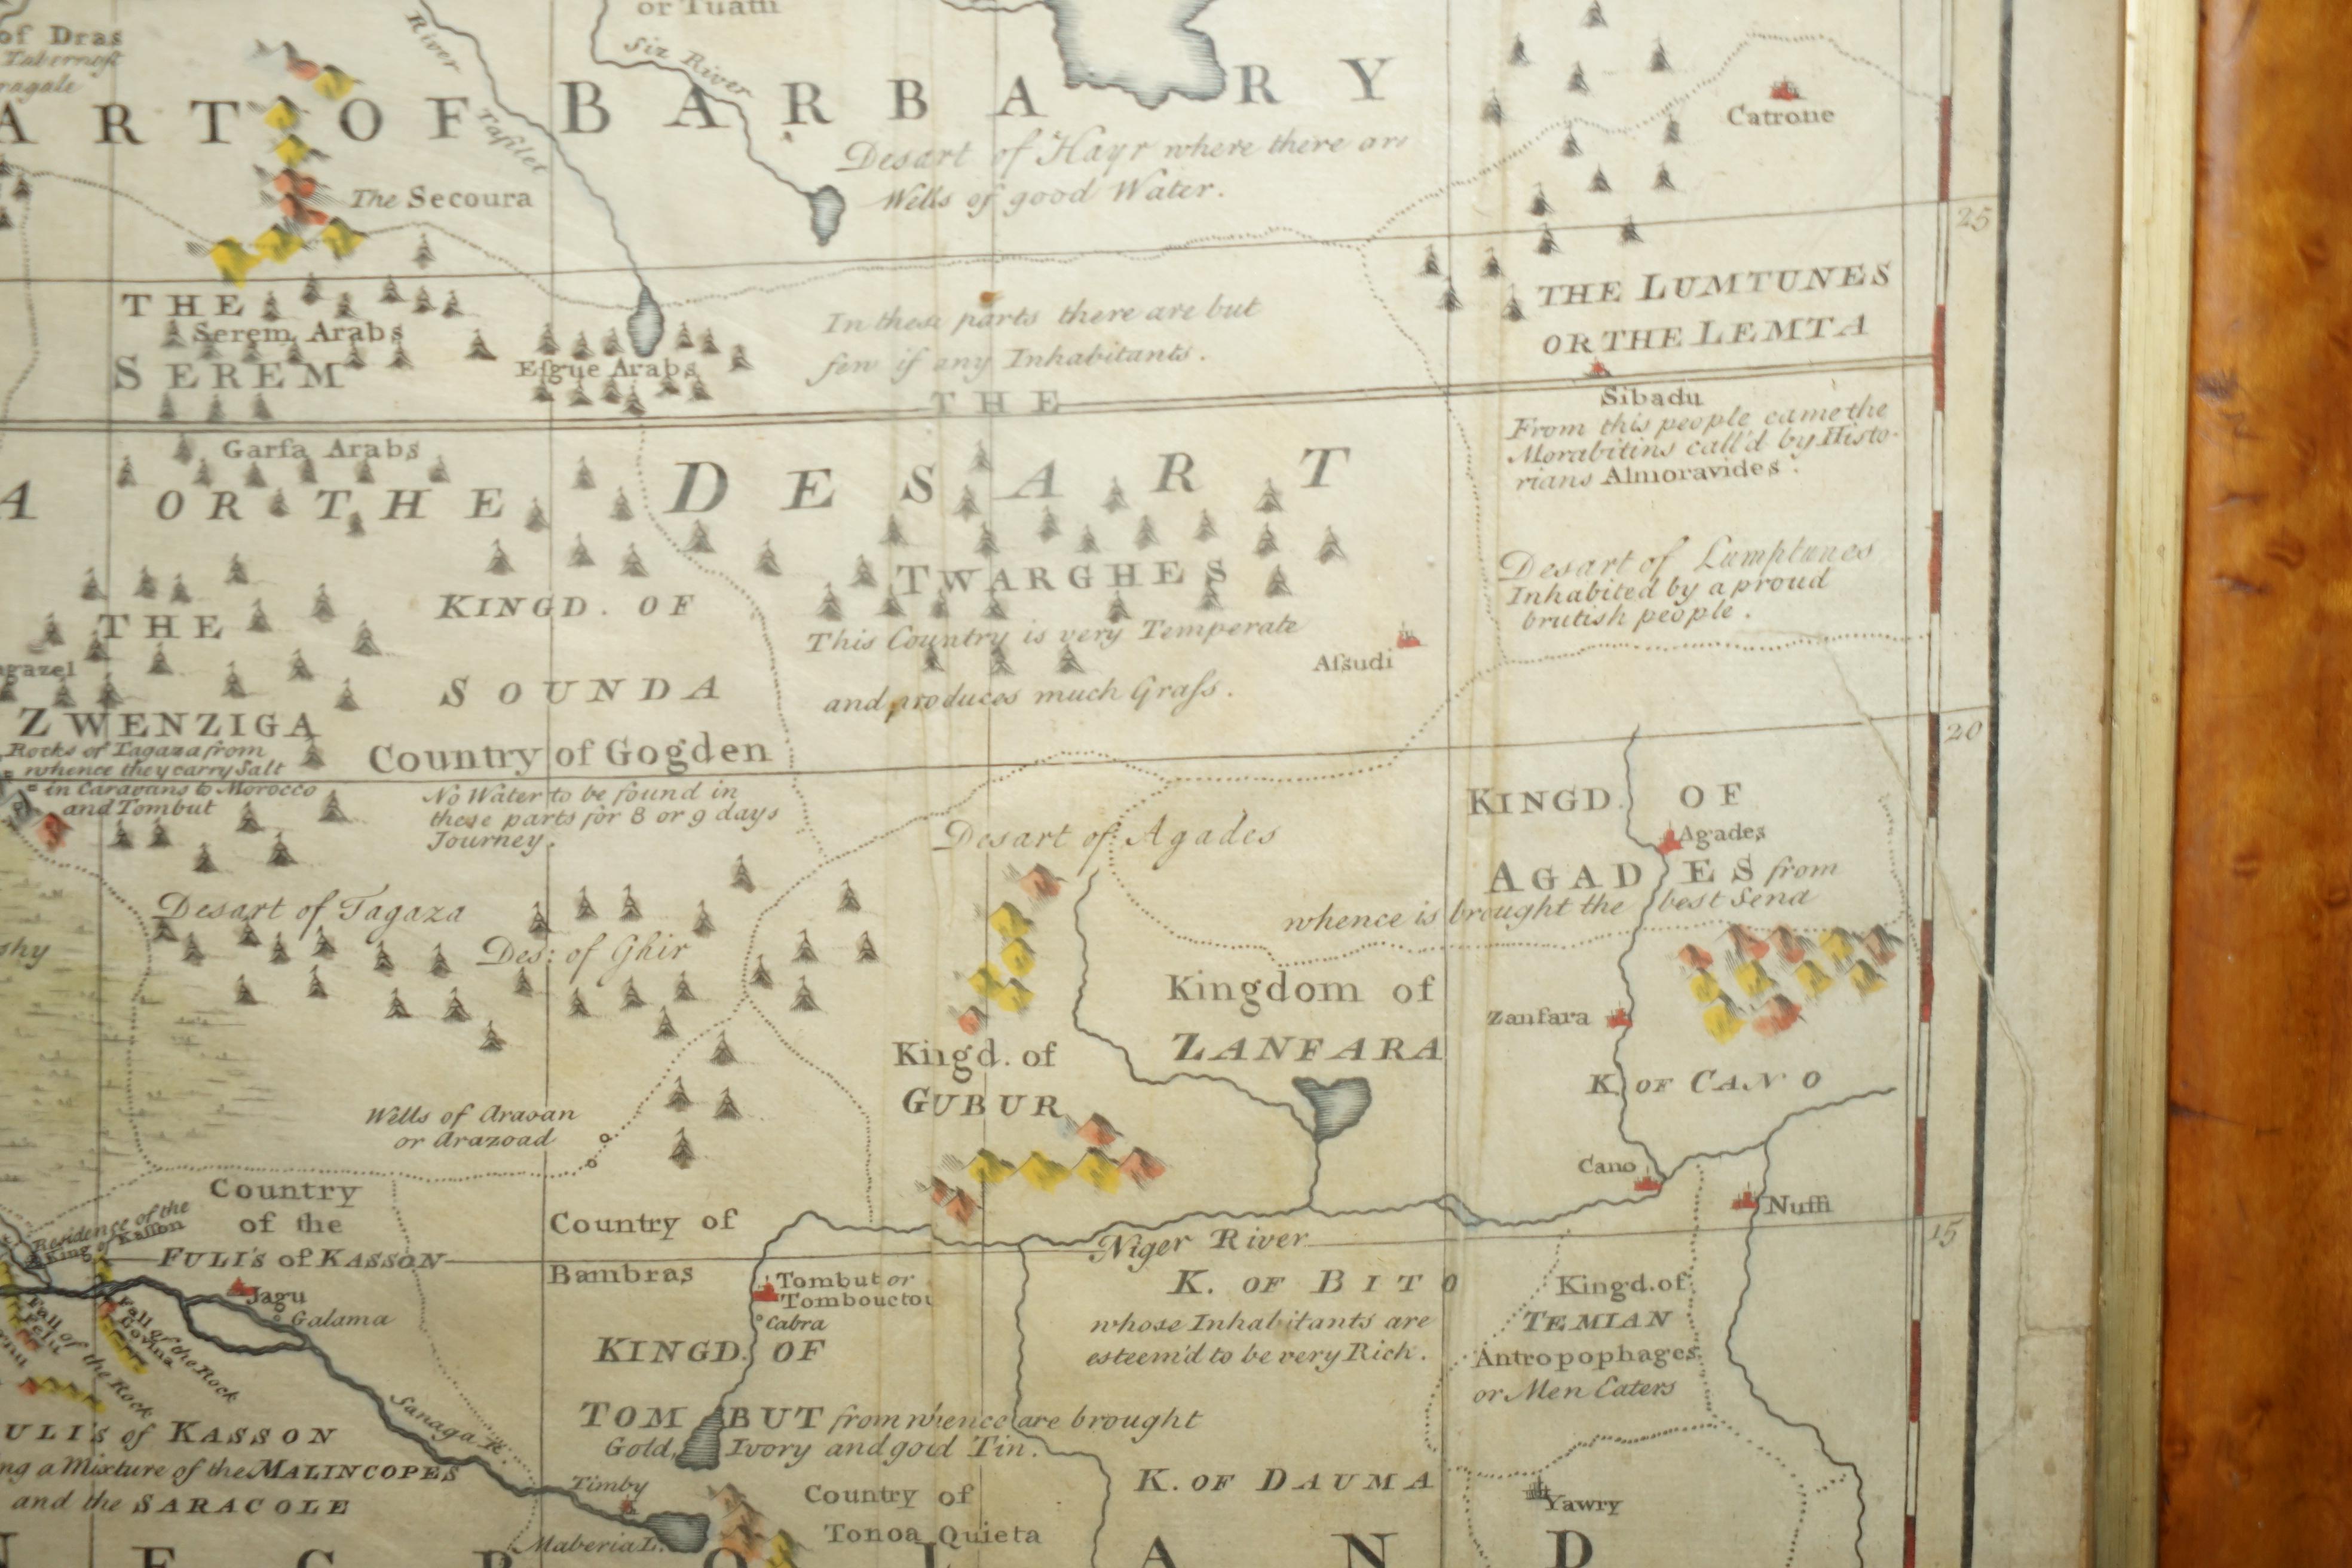 1747 British Map Showing the Kingdom of Judah on the West Coast of Africa 3